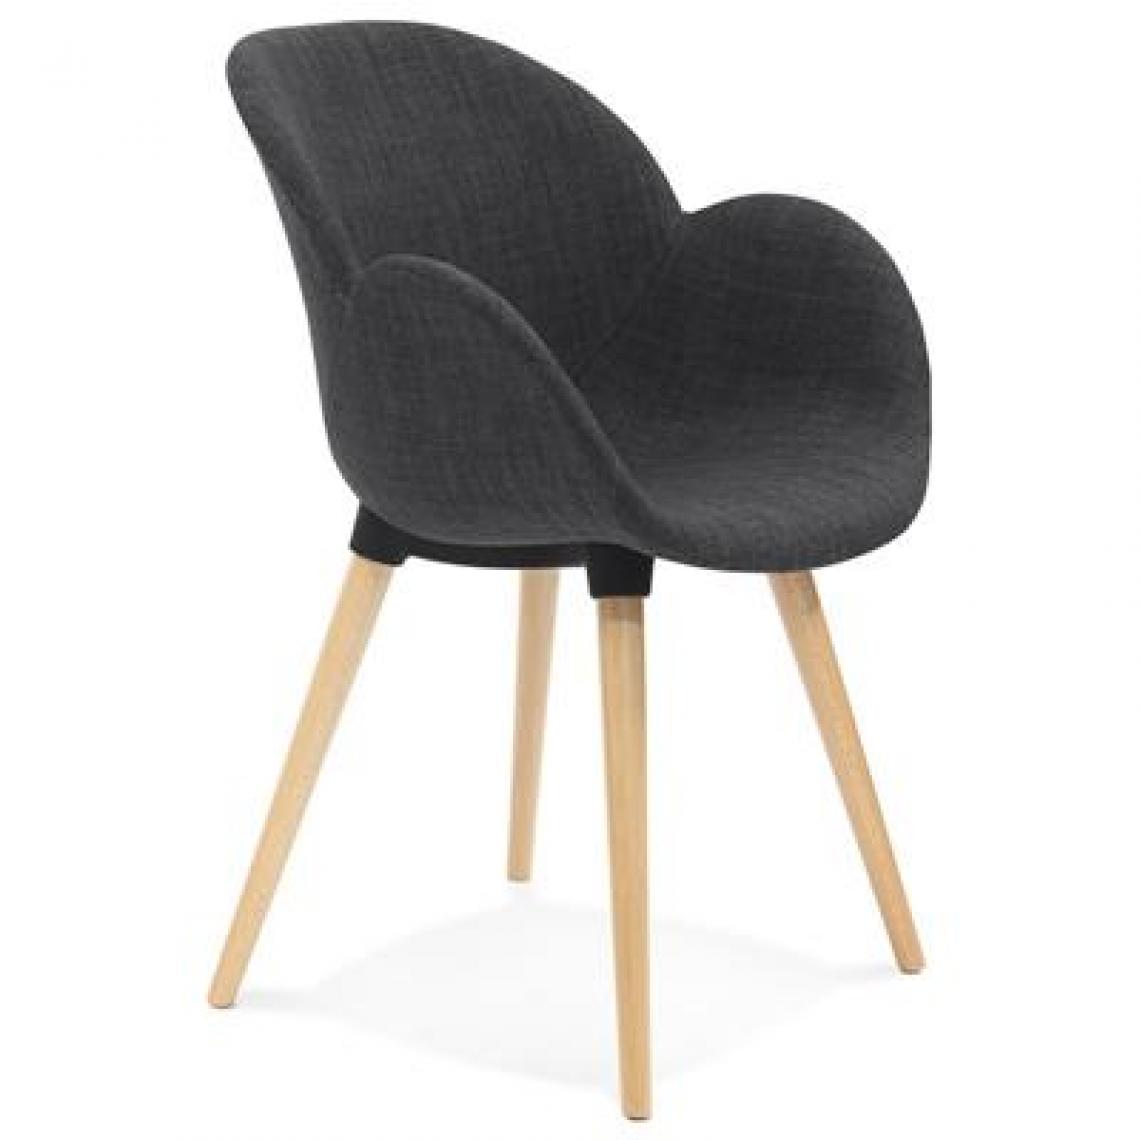 Nouvomeuble - Chaise design grise style scandinave ANGELA 3 - Chaises